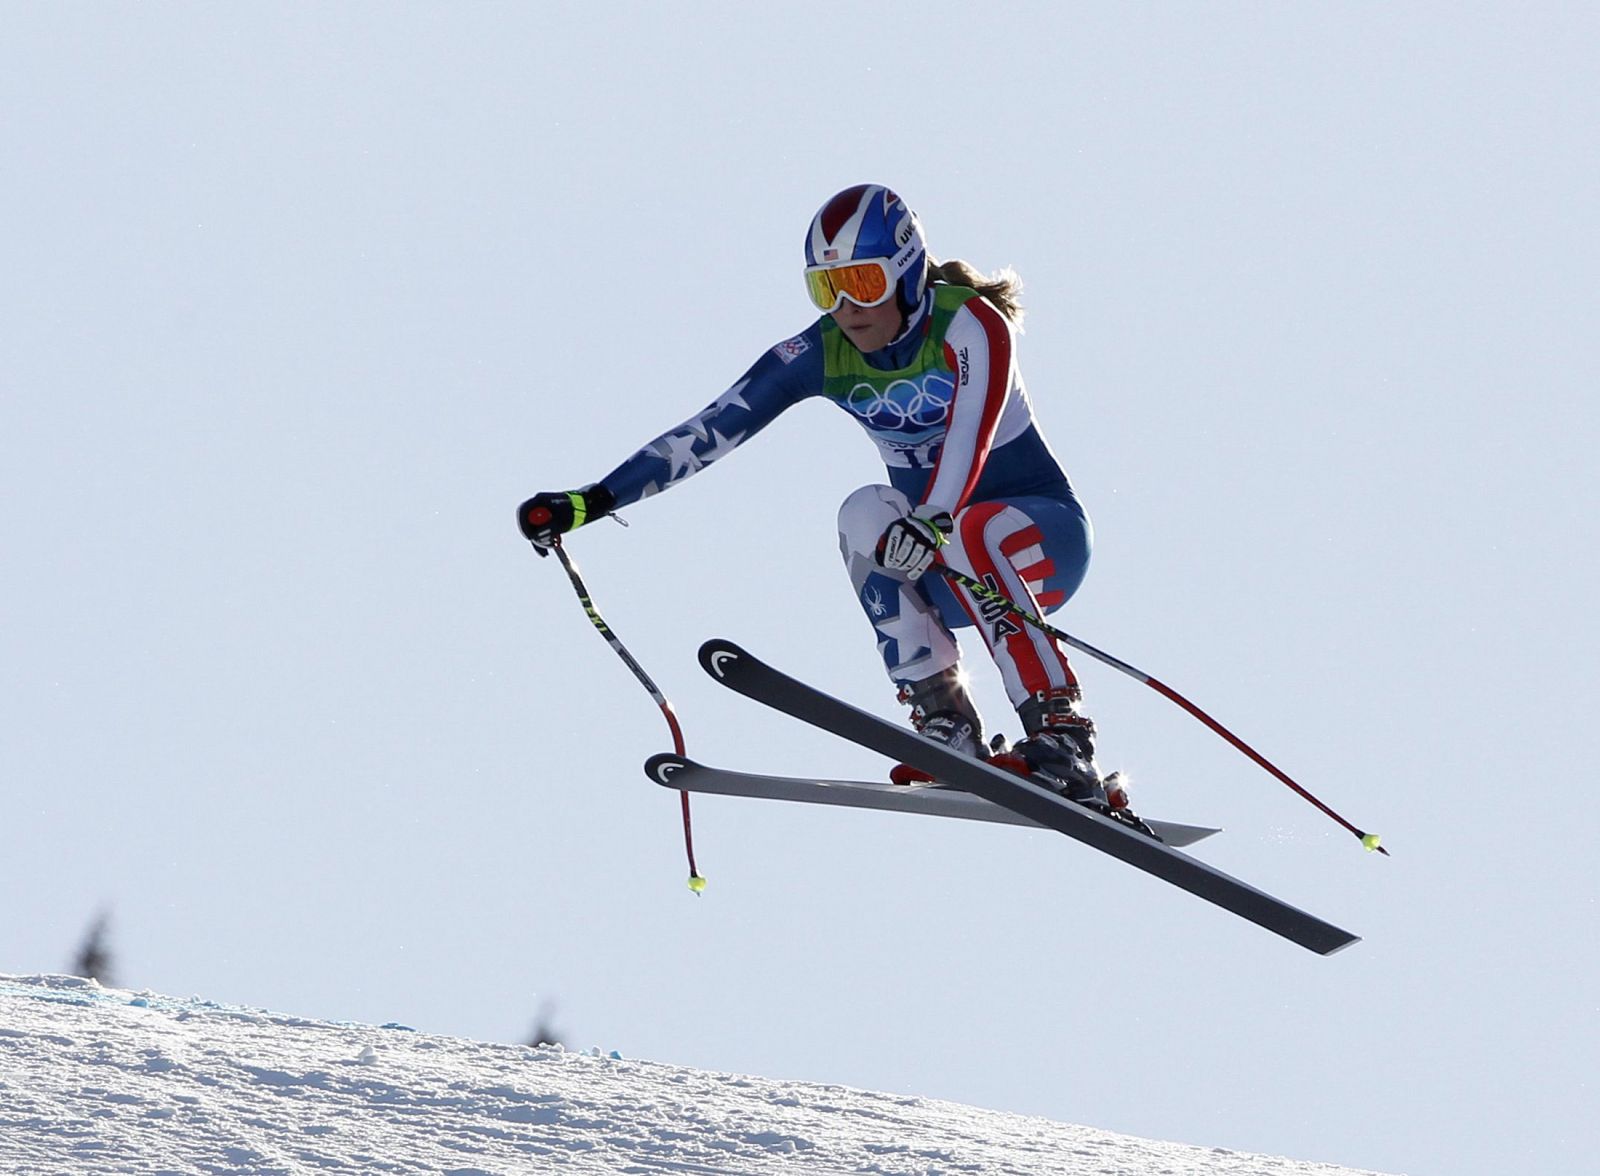 Vonn of the U.S. goes airborne during the women's Alpine Skiing Downhill race at the Vancouver 2010 Winter Olympics in Whistler